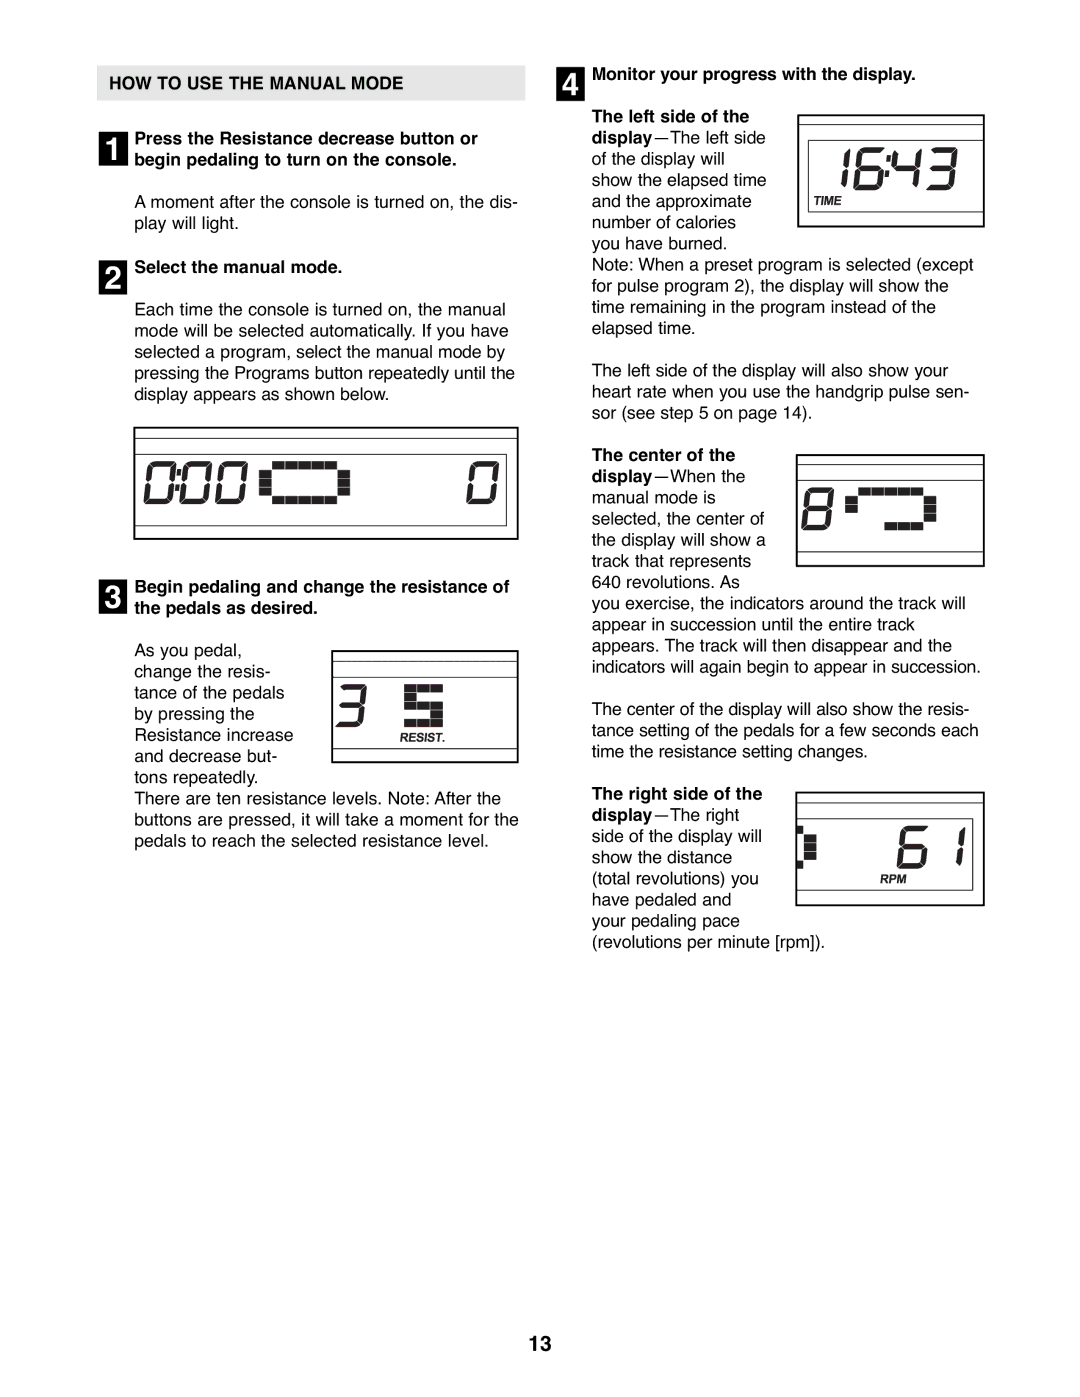 ProForm PFEL6026.0 user manual HOW to USE the Manual Mode 